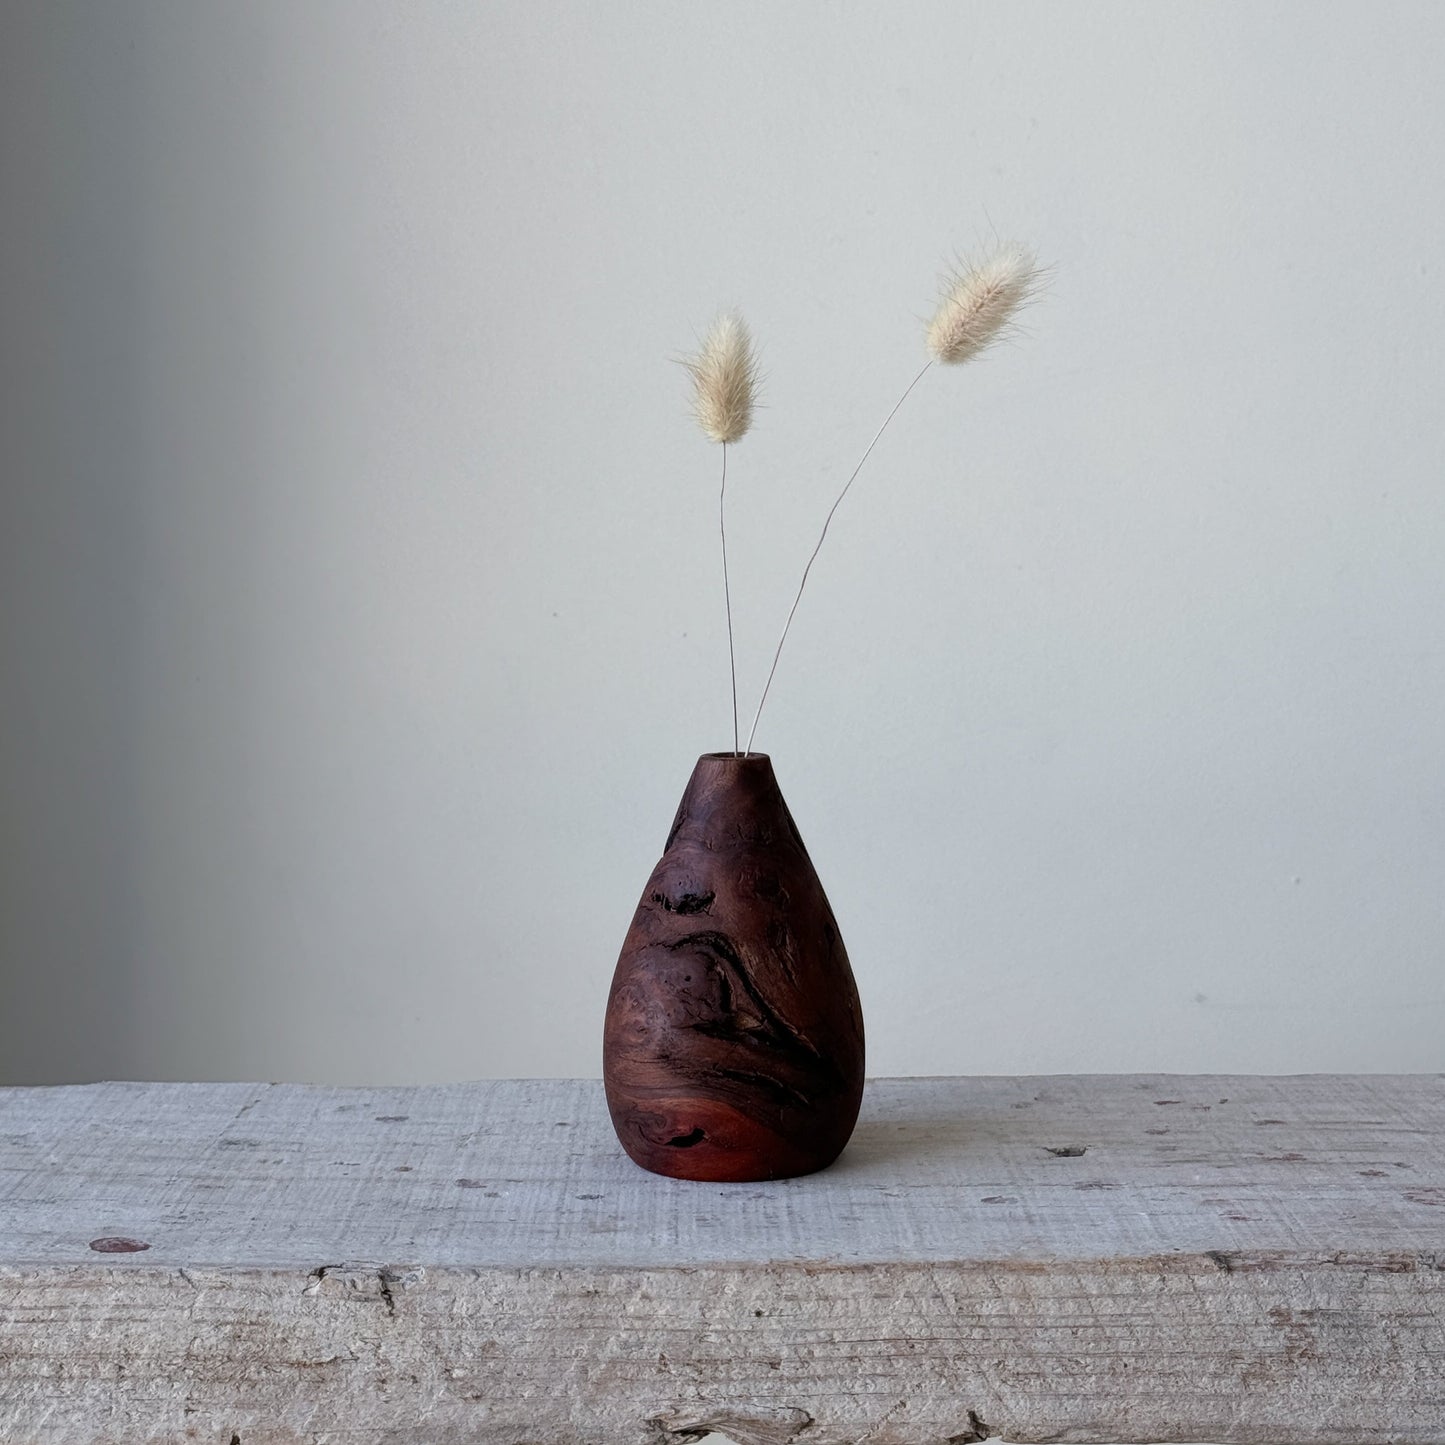 NEW - "In nature nothing is created, nothing is lost; everything is transformed" | Vase